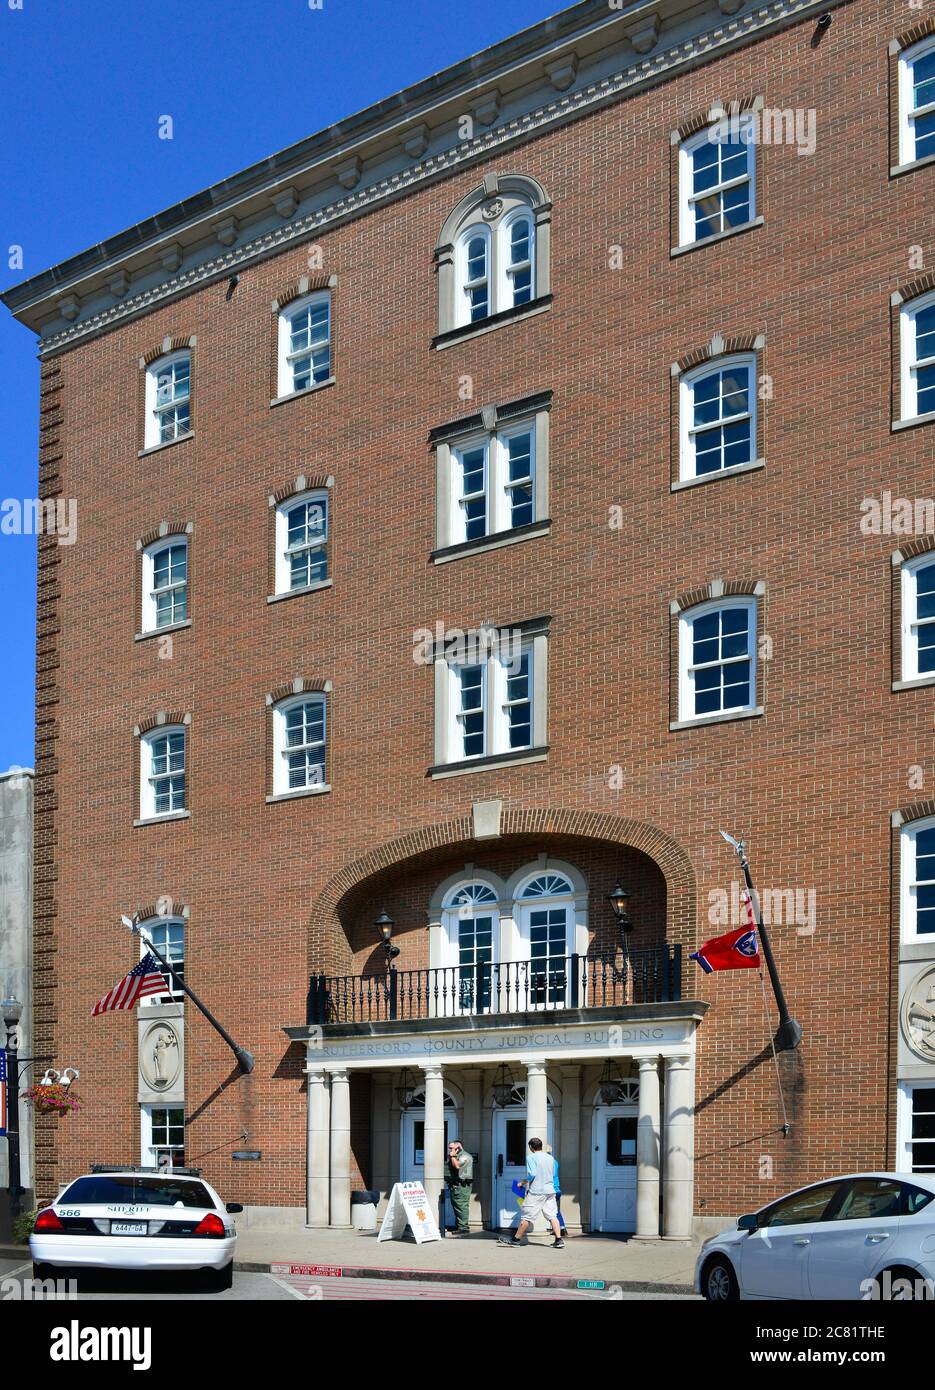 The Old Rutherford County Judicial Building, built in 1925, recently underwent interior remodel in Murfreesboro, TN, small town USA Stock Photo